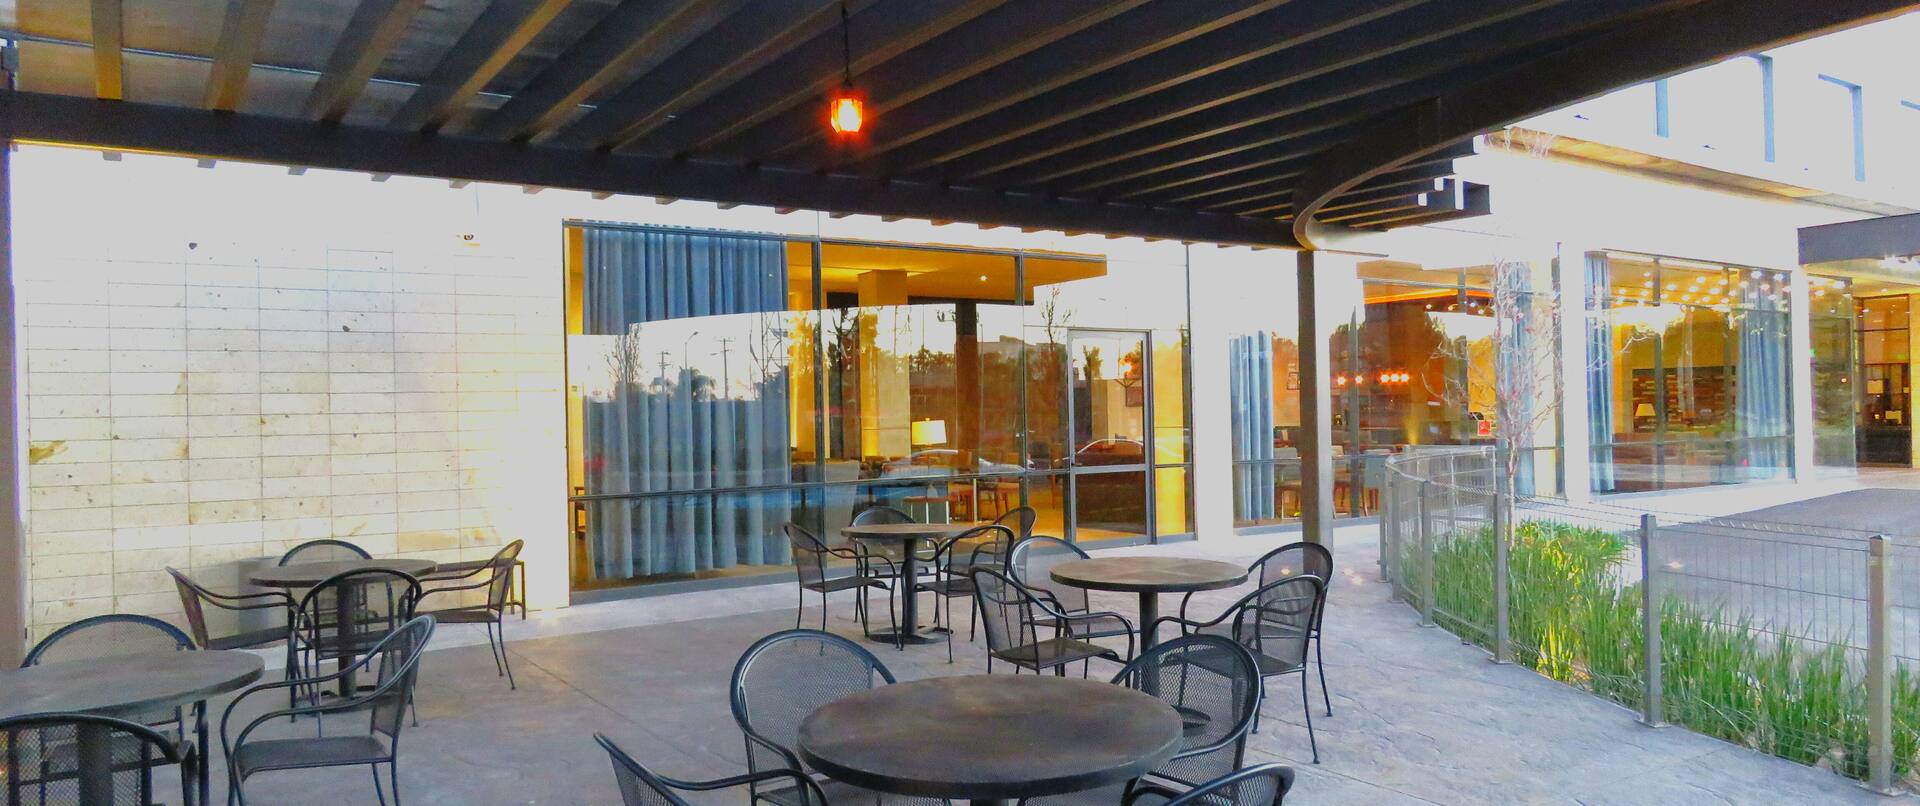 Tables and Chairs on Outdoor Patio Area